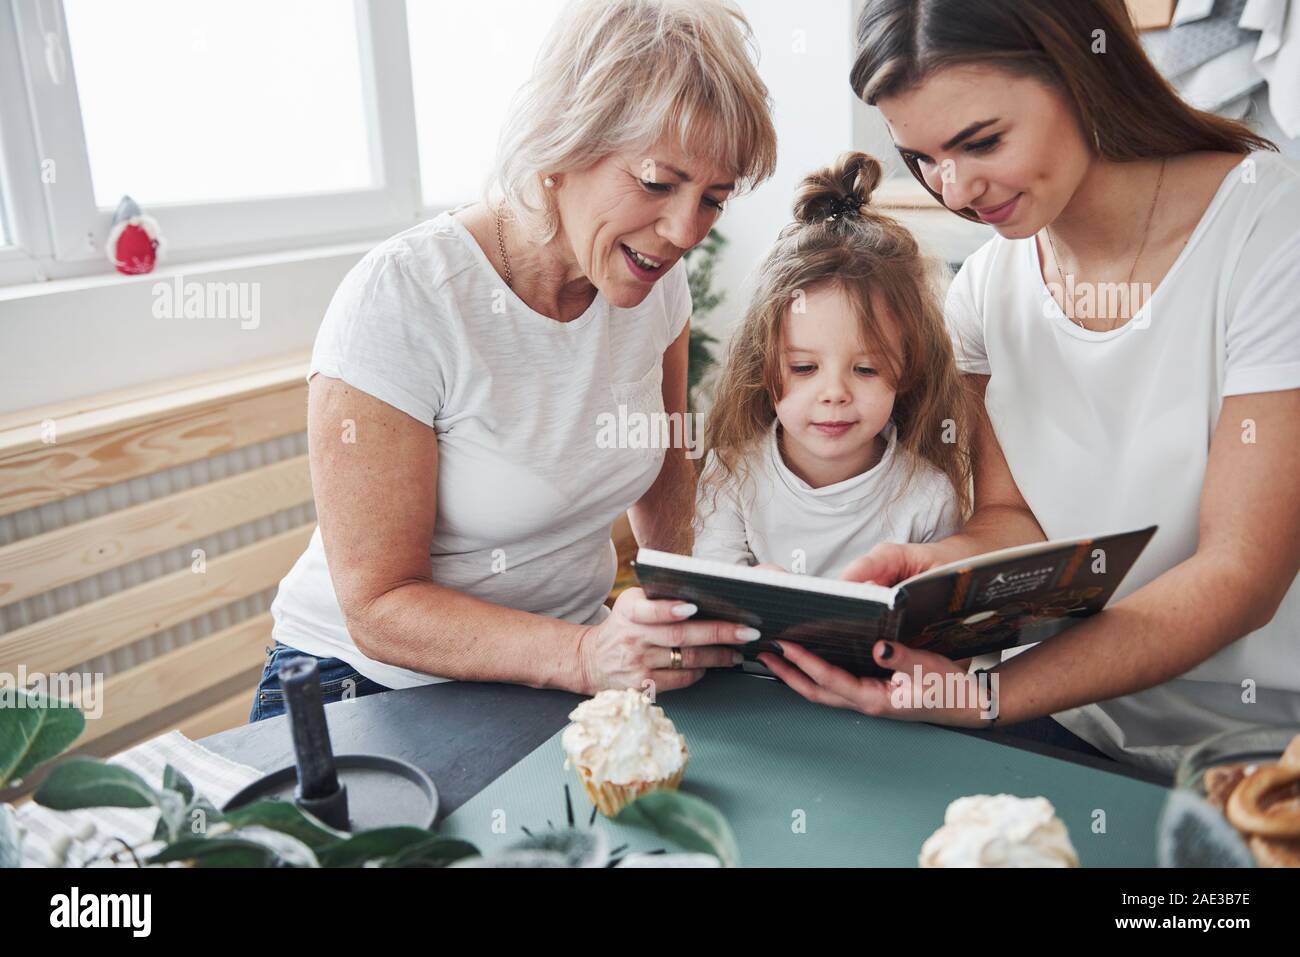 Fast learning kid. Mother, grandmother and daughter having good time in the kitchen Stock Photo